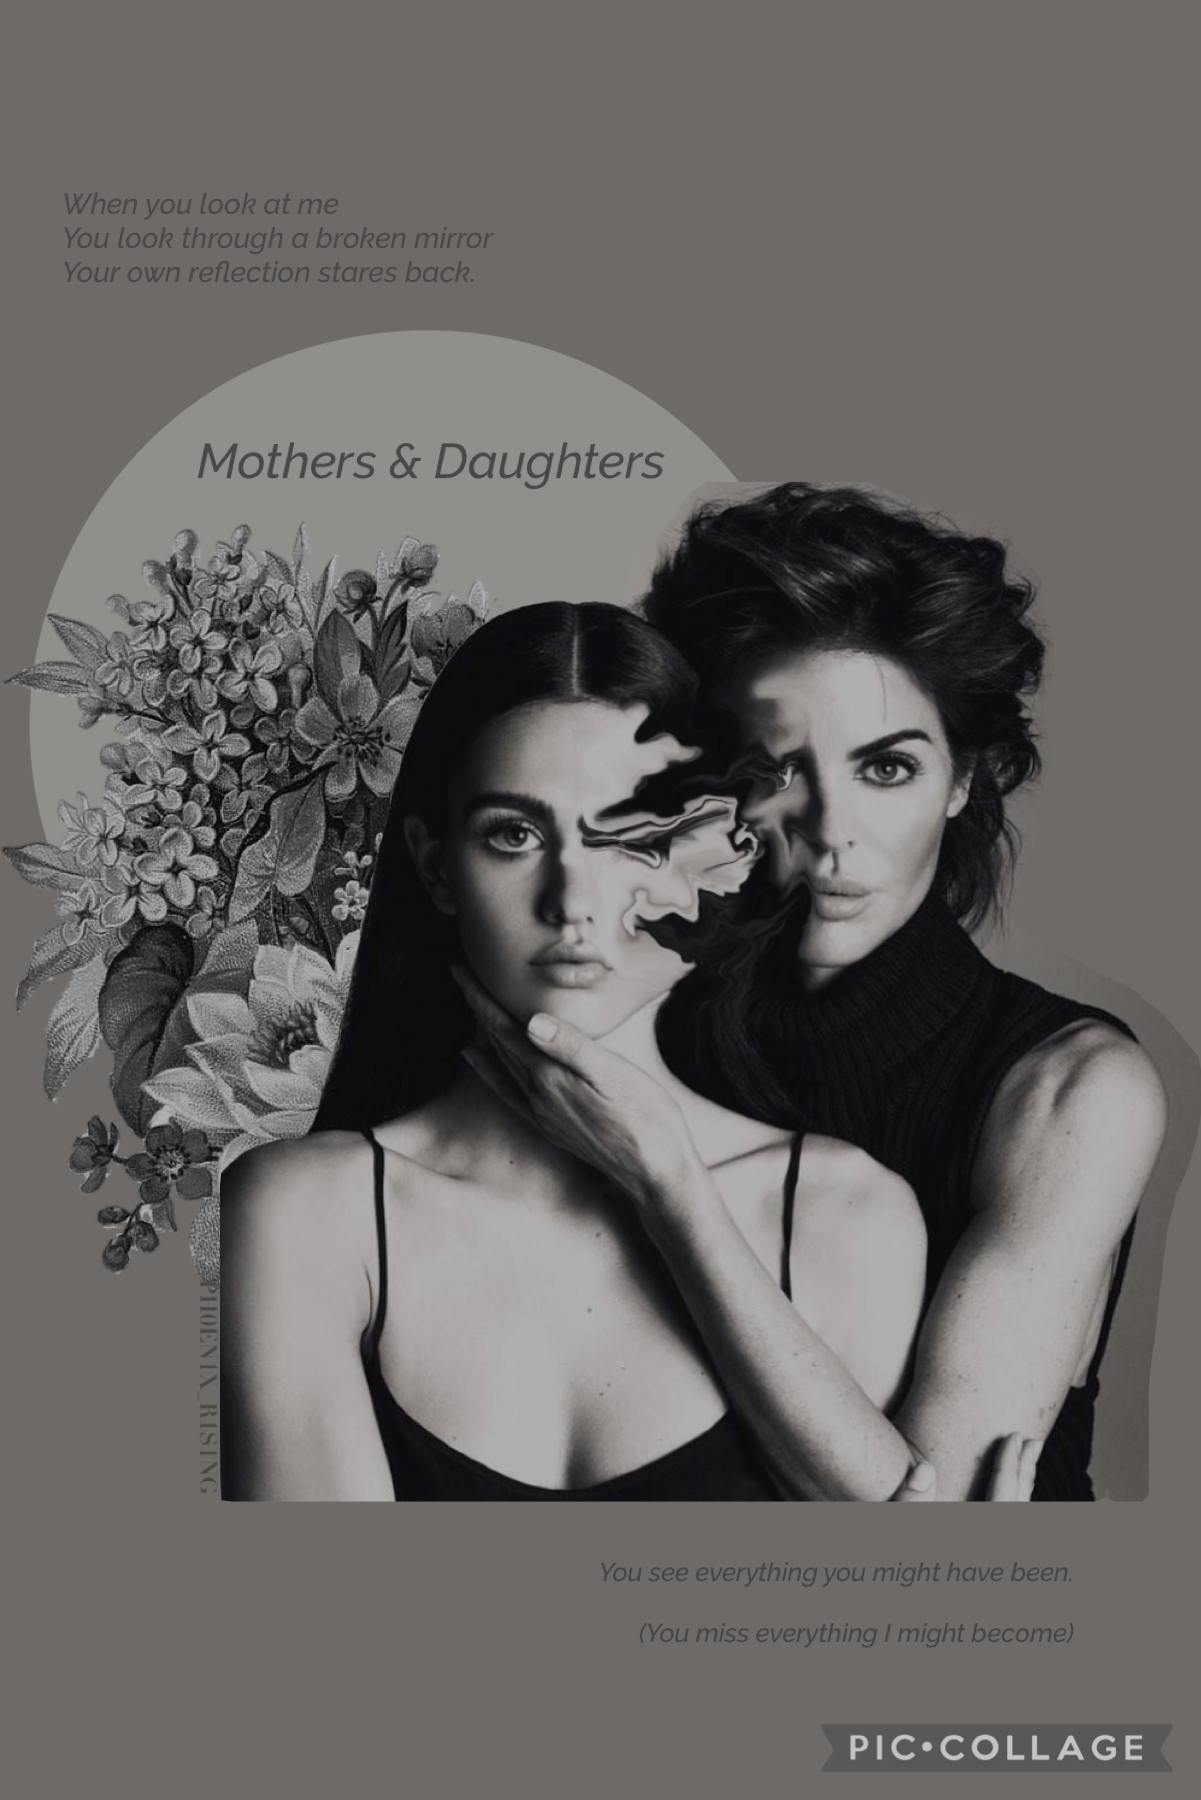 🪞Mothers & Daughters🪞

1/13/22